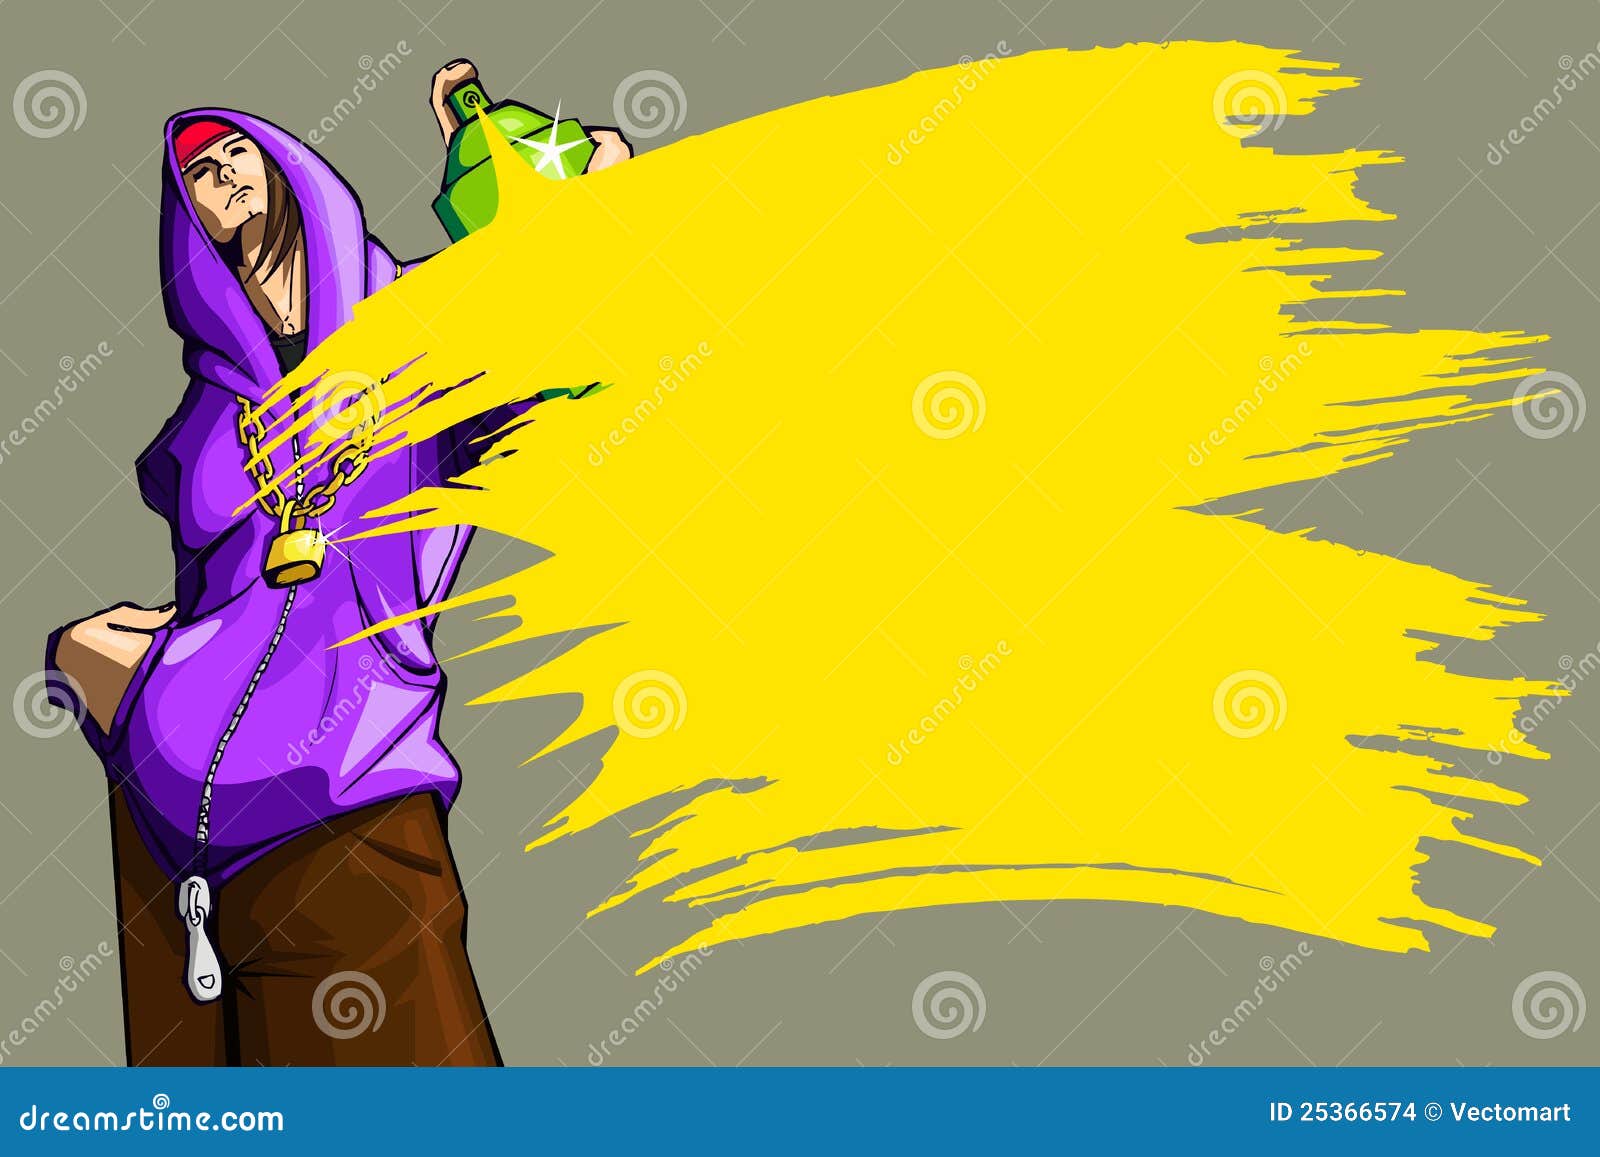 Man Doing Spray Painting Stock Vector Illustration Of Background